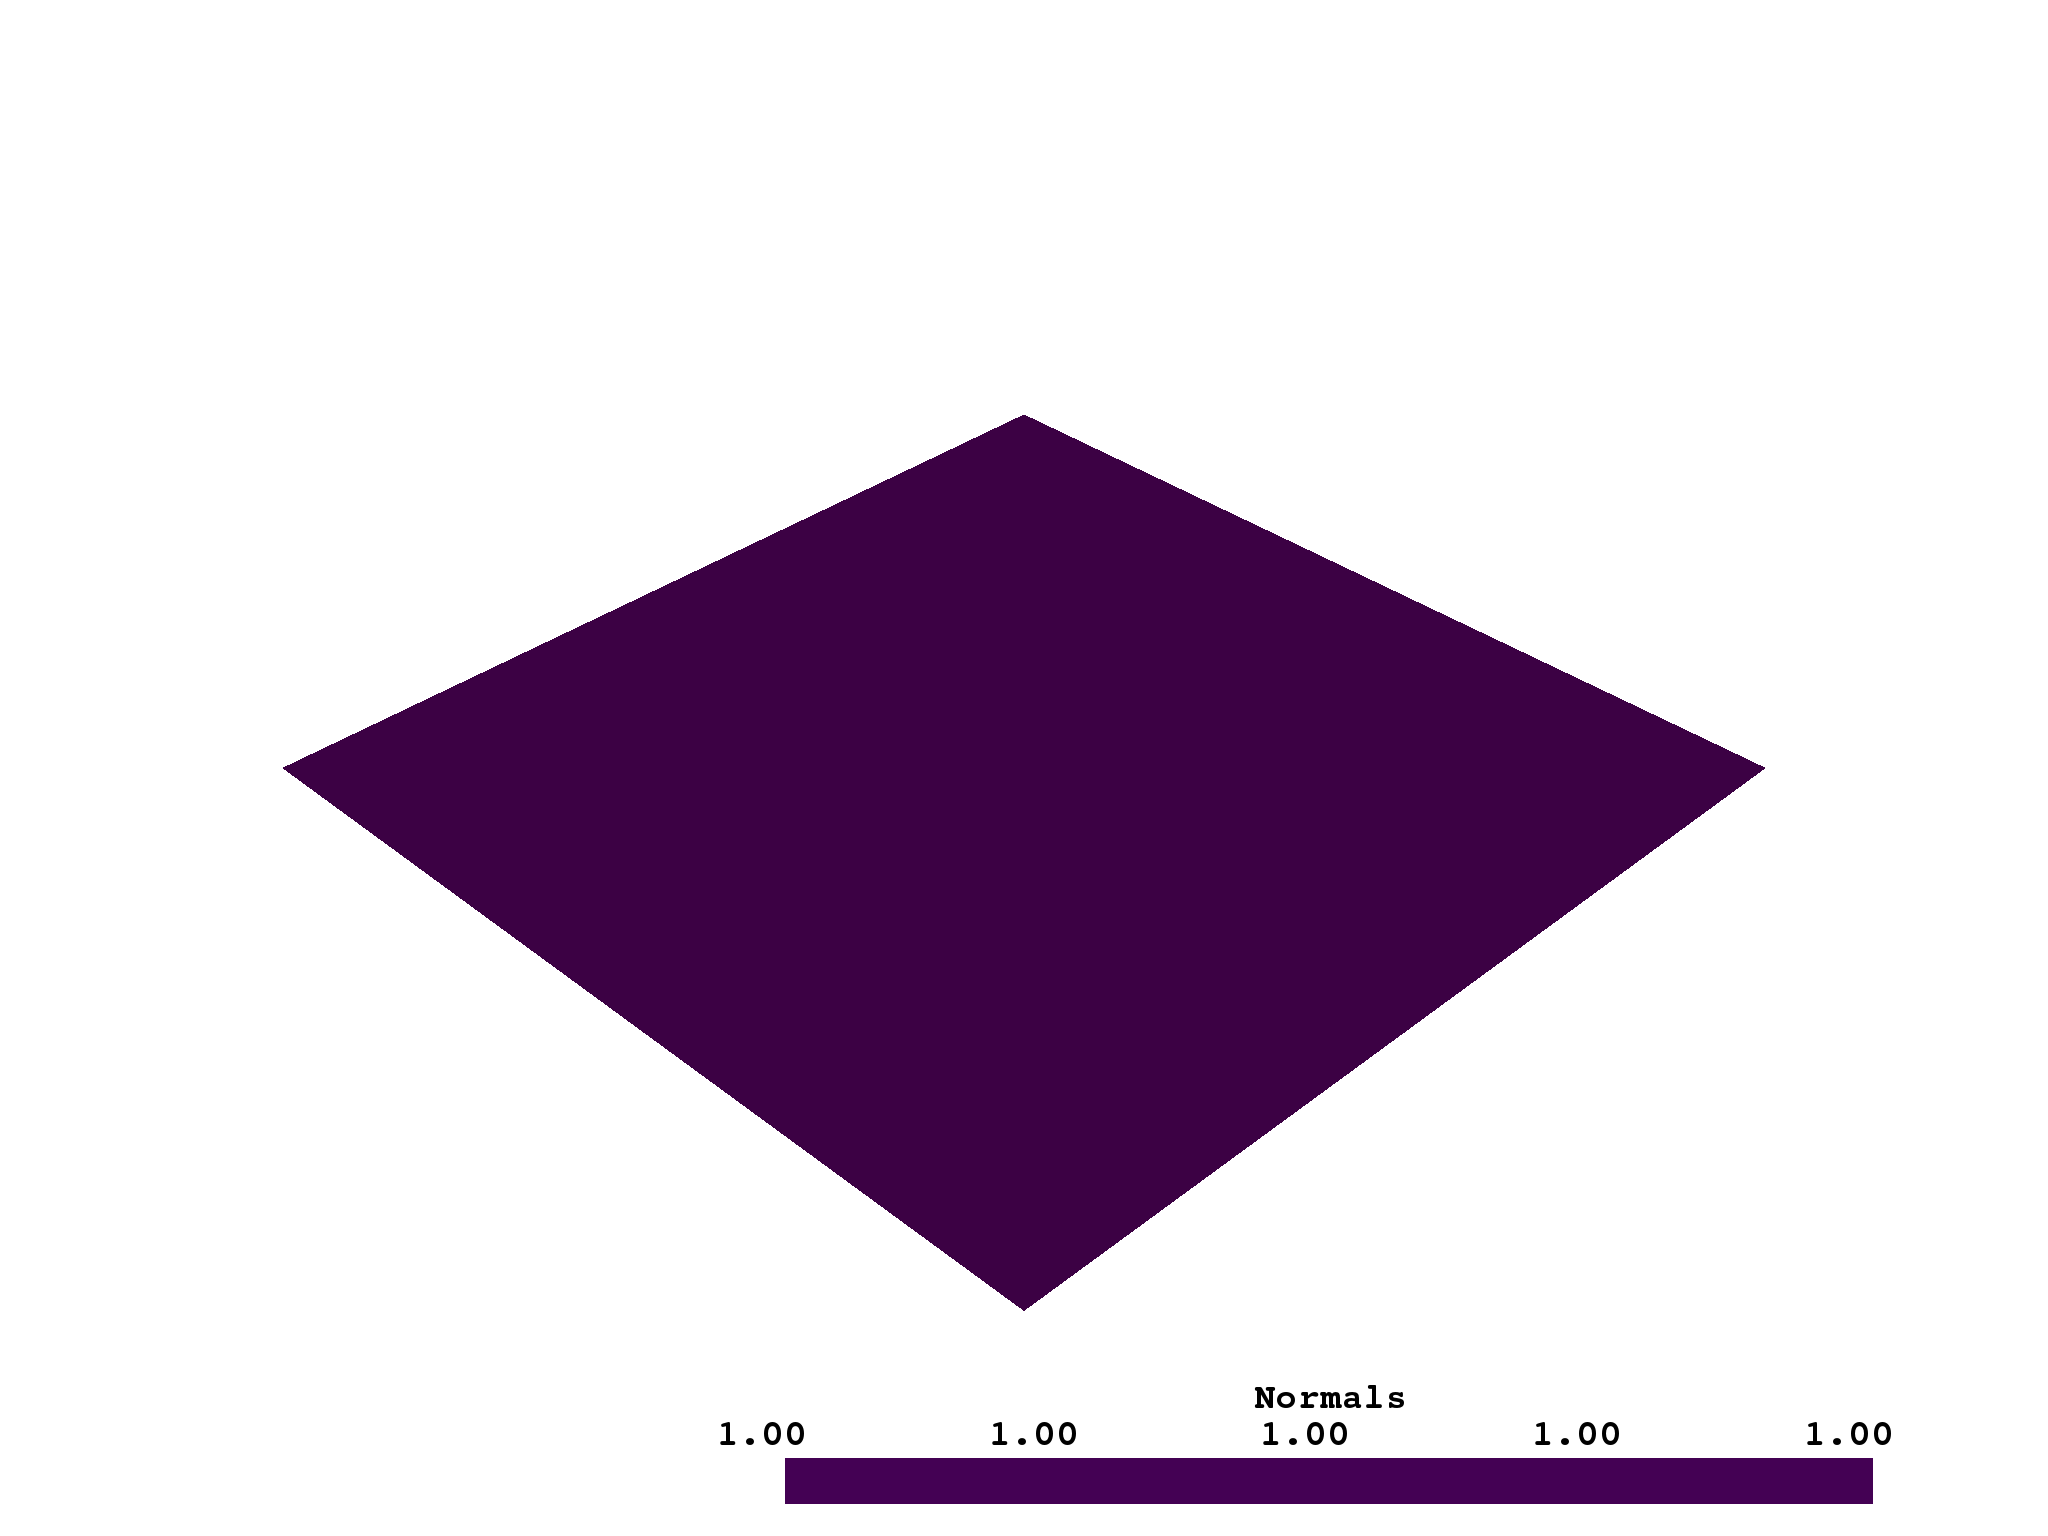 sphx_glr_plot-clear_003.png